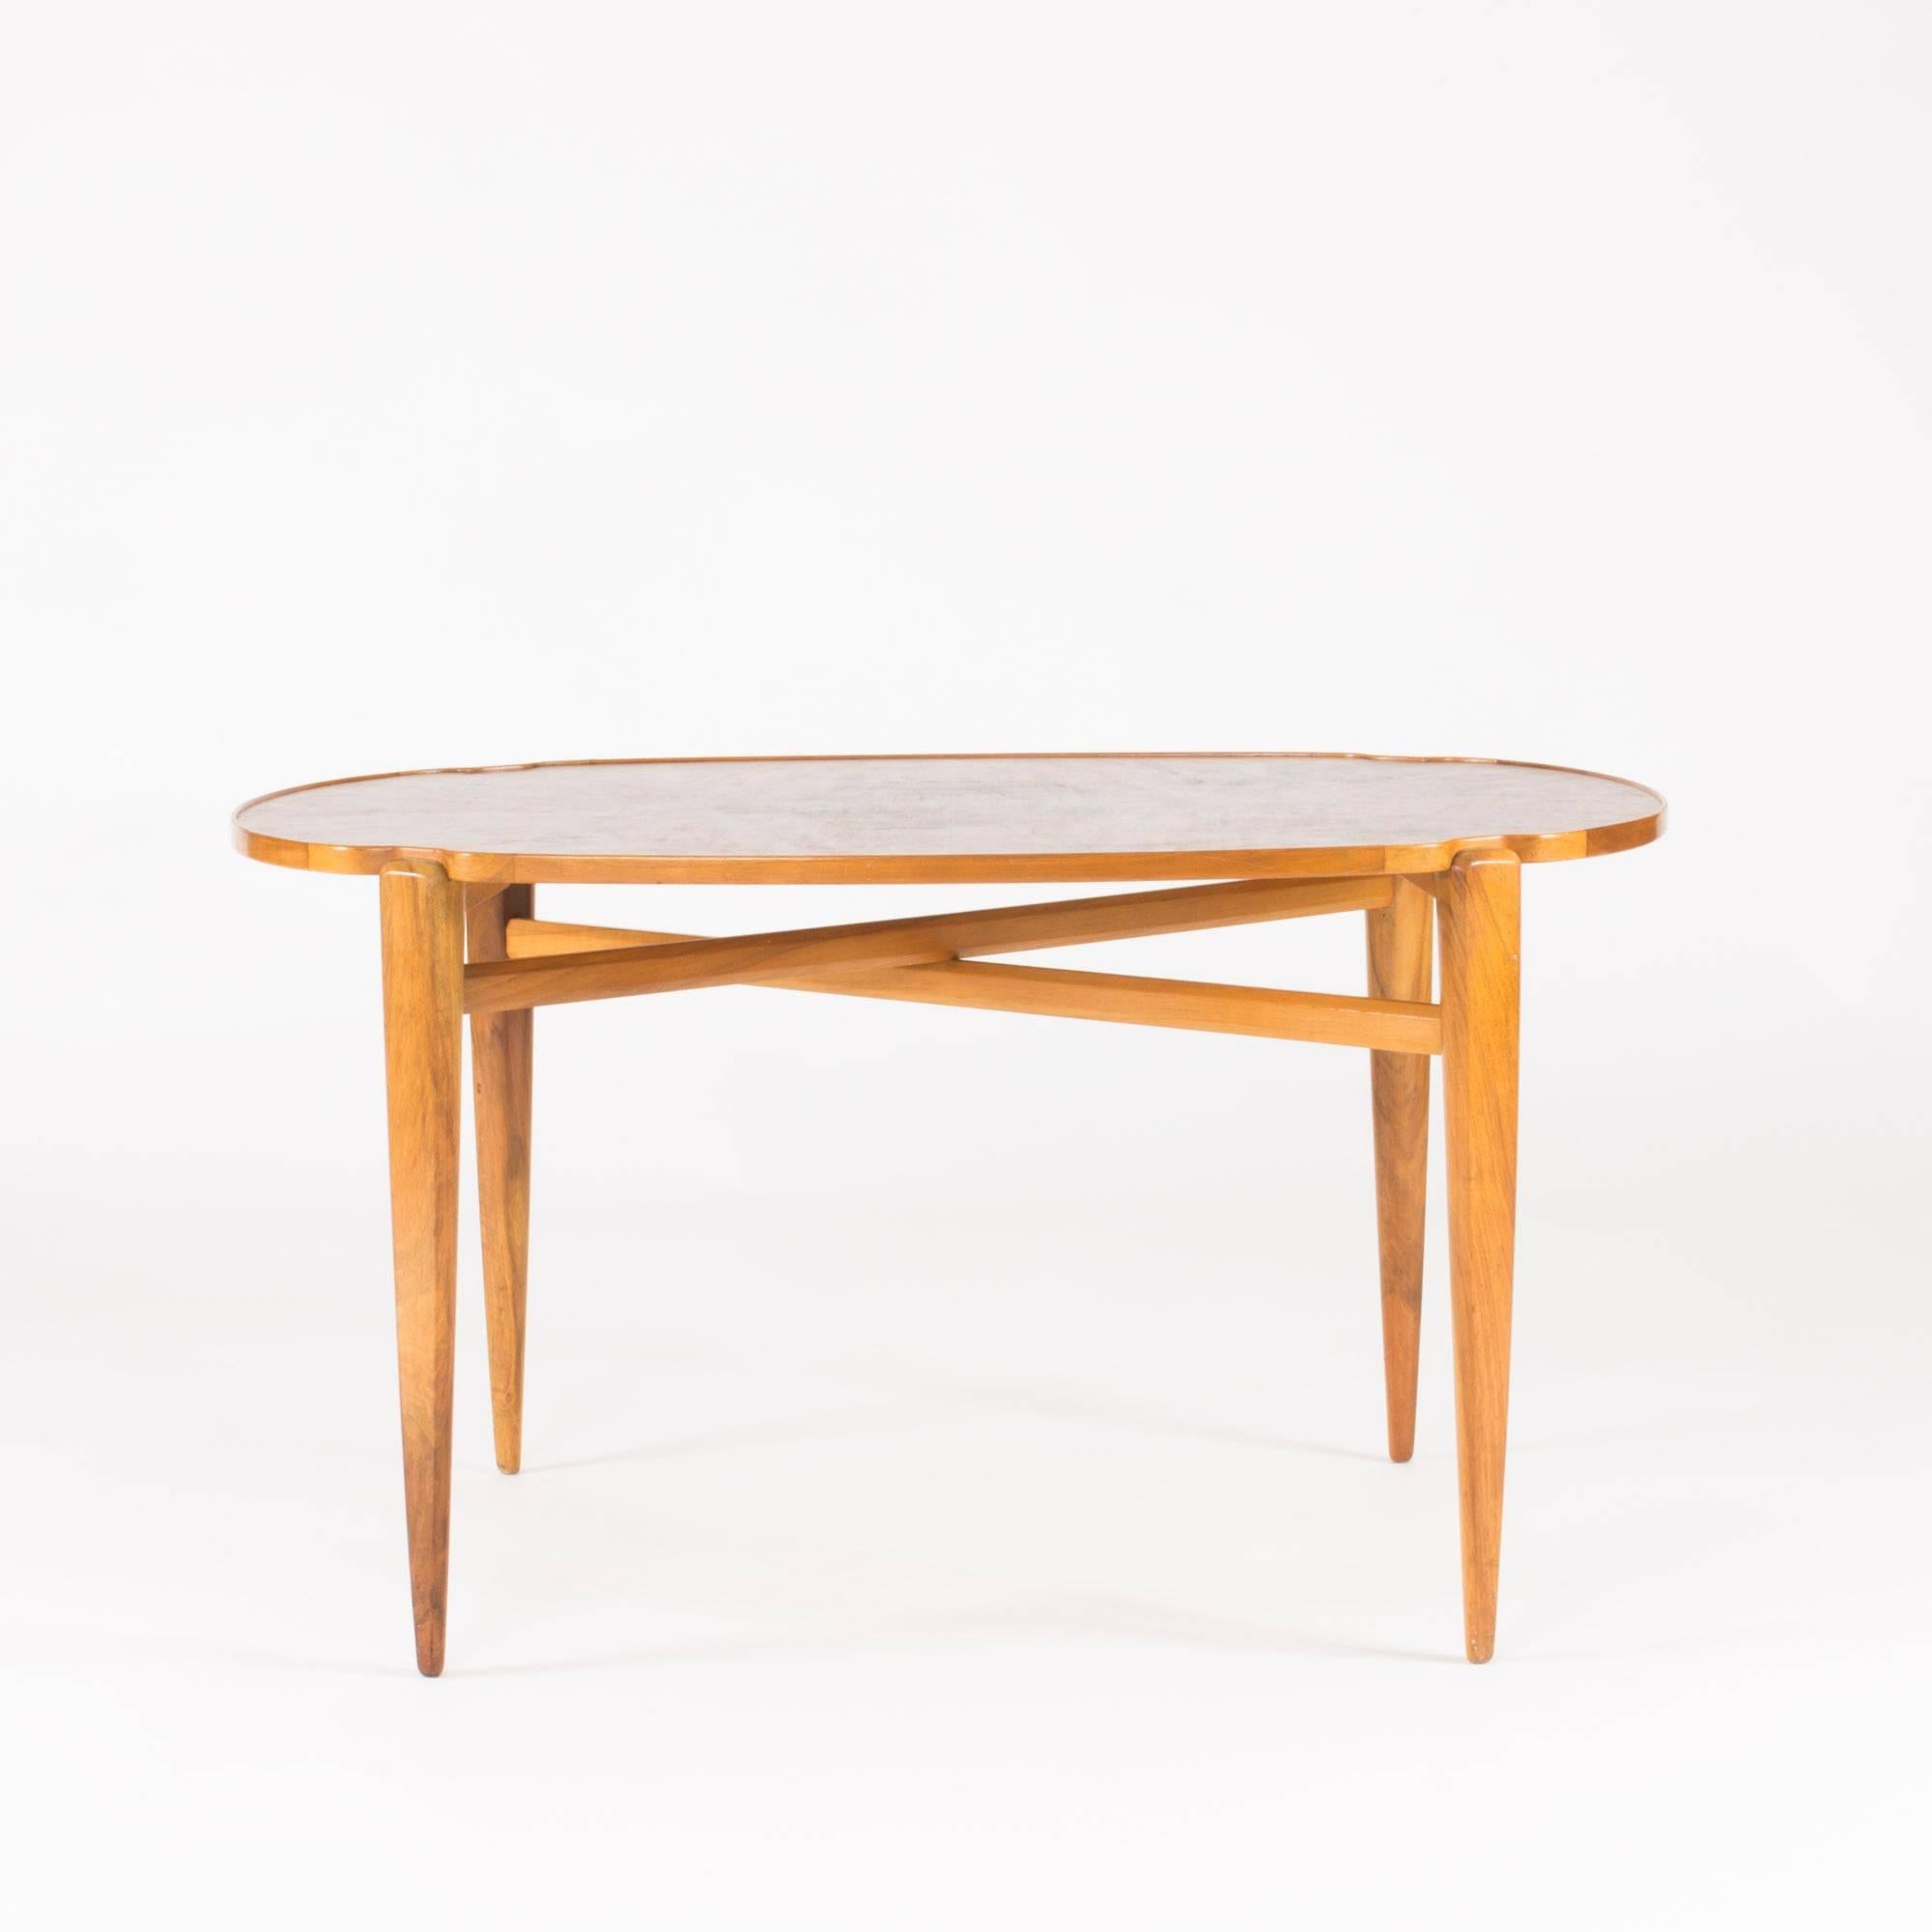 Exquisite coffee table by Axel Larsson with a walnut root tabletop and walnut base, executed by master carpenter Hjalmar Jacksson at Stockholms Hantverksförening. The tabletop has a dramatic, dark color and pattern and a rim around the edge in a